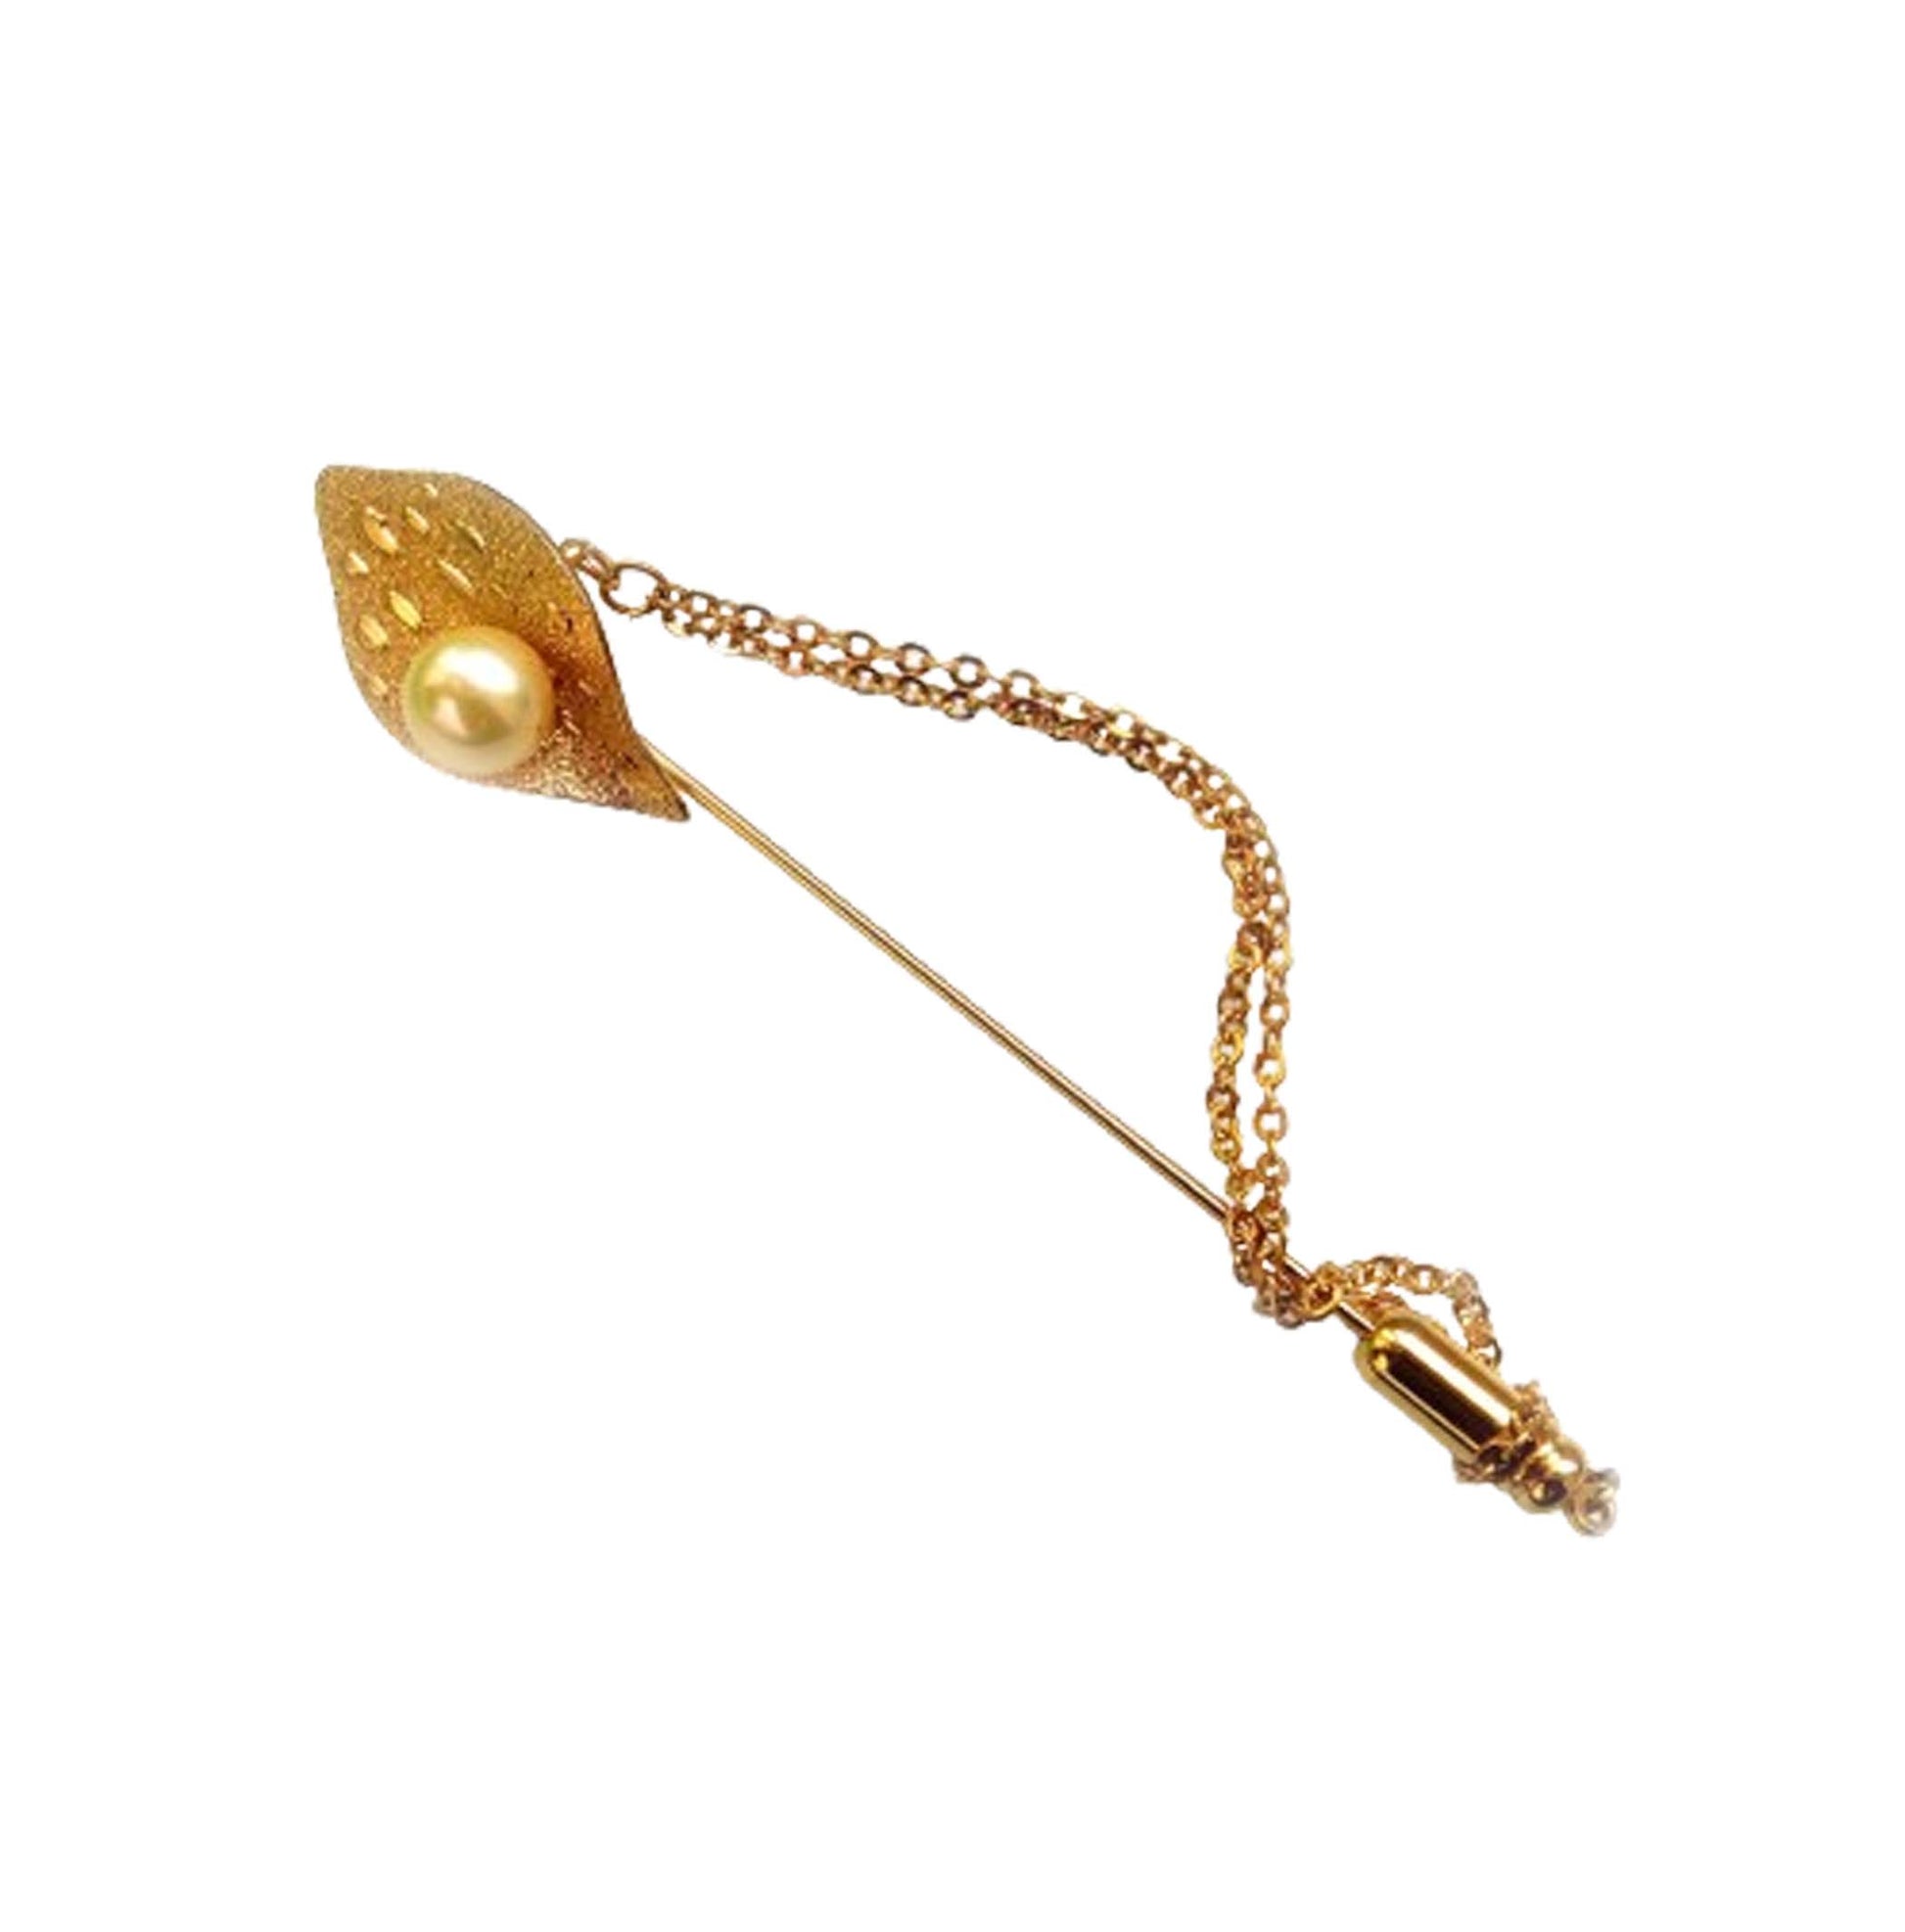 Vintage Akoya Pearl Stick Pin Gold Plated